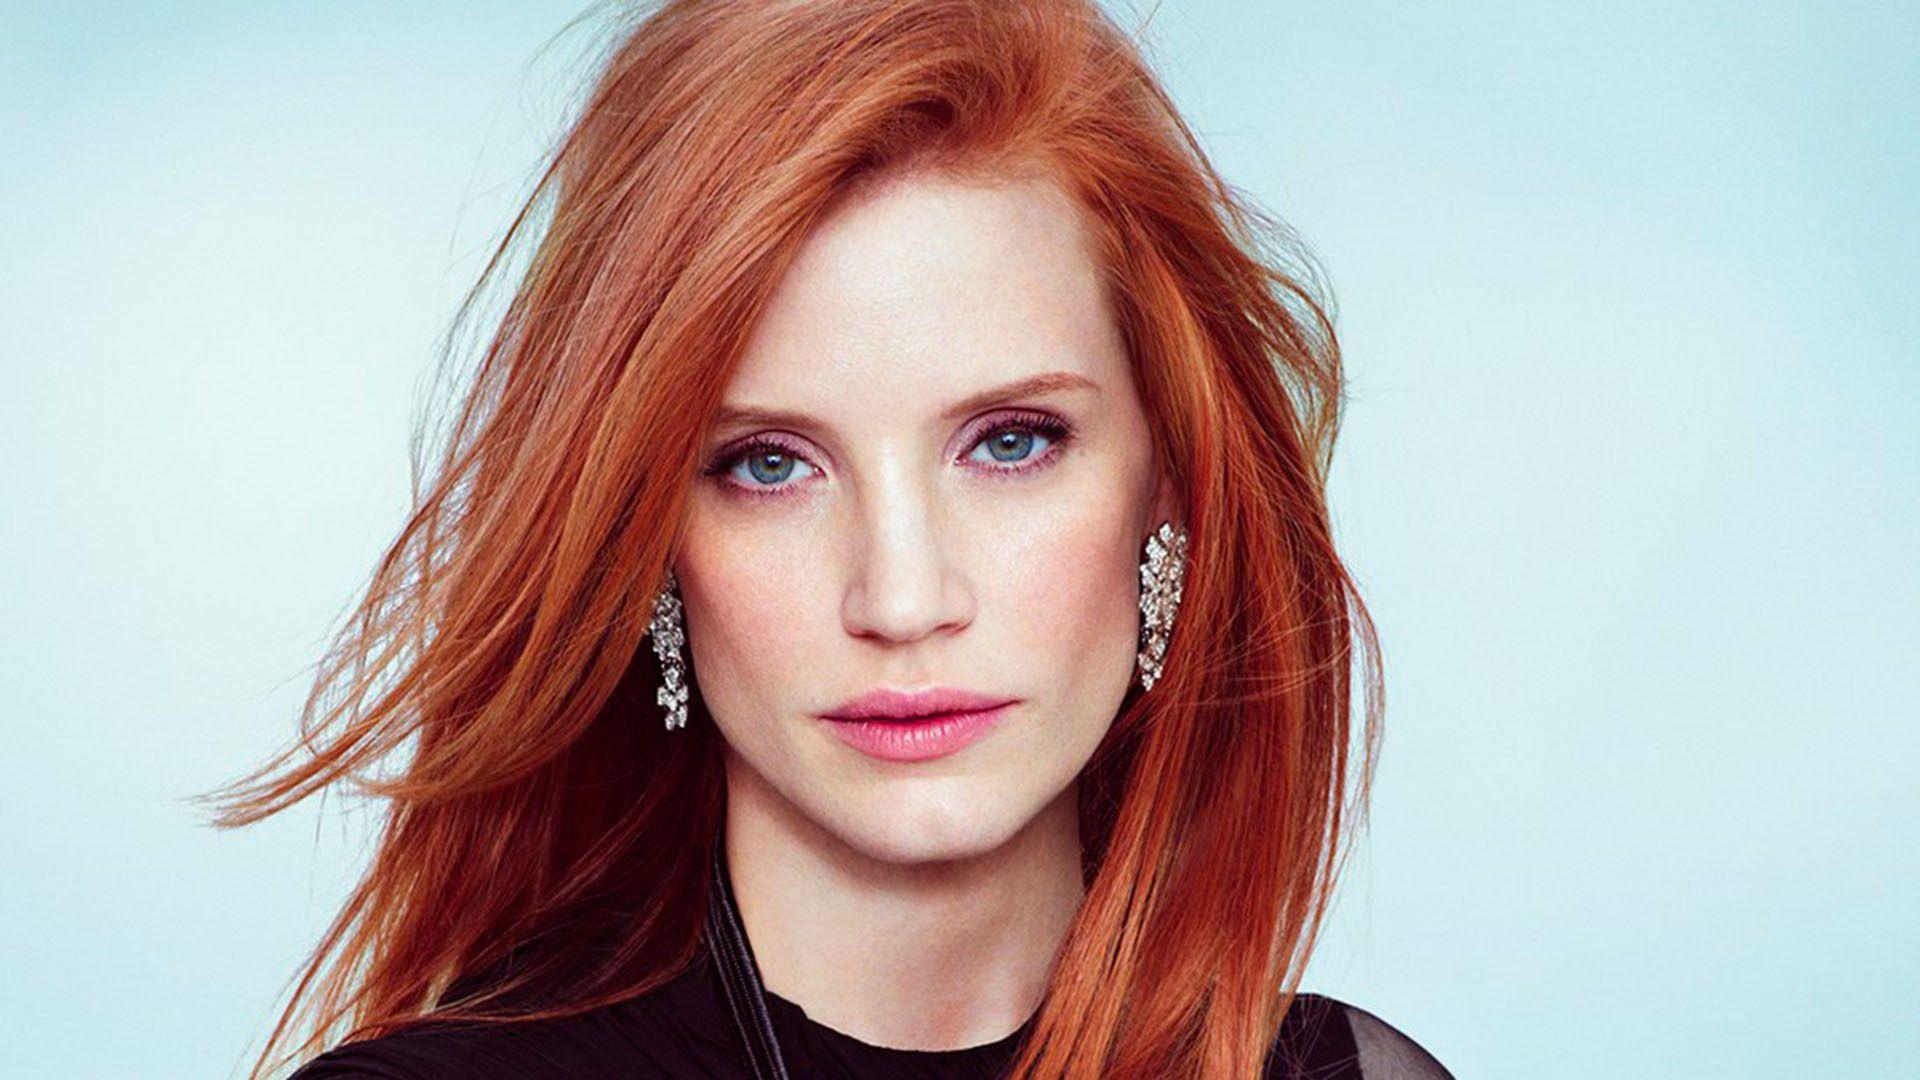 Jessica Chastain Wallpaper Image Photo Picture Background